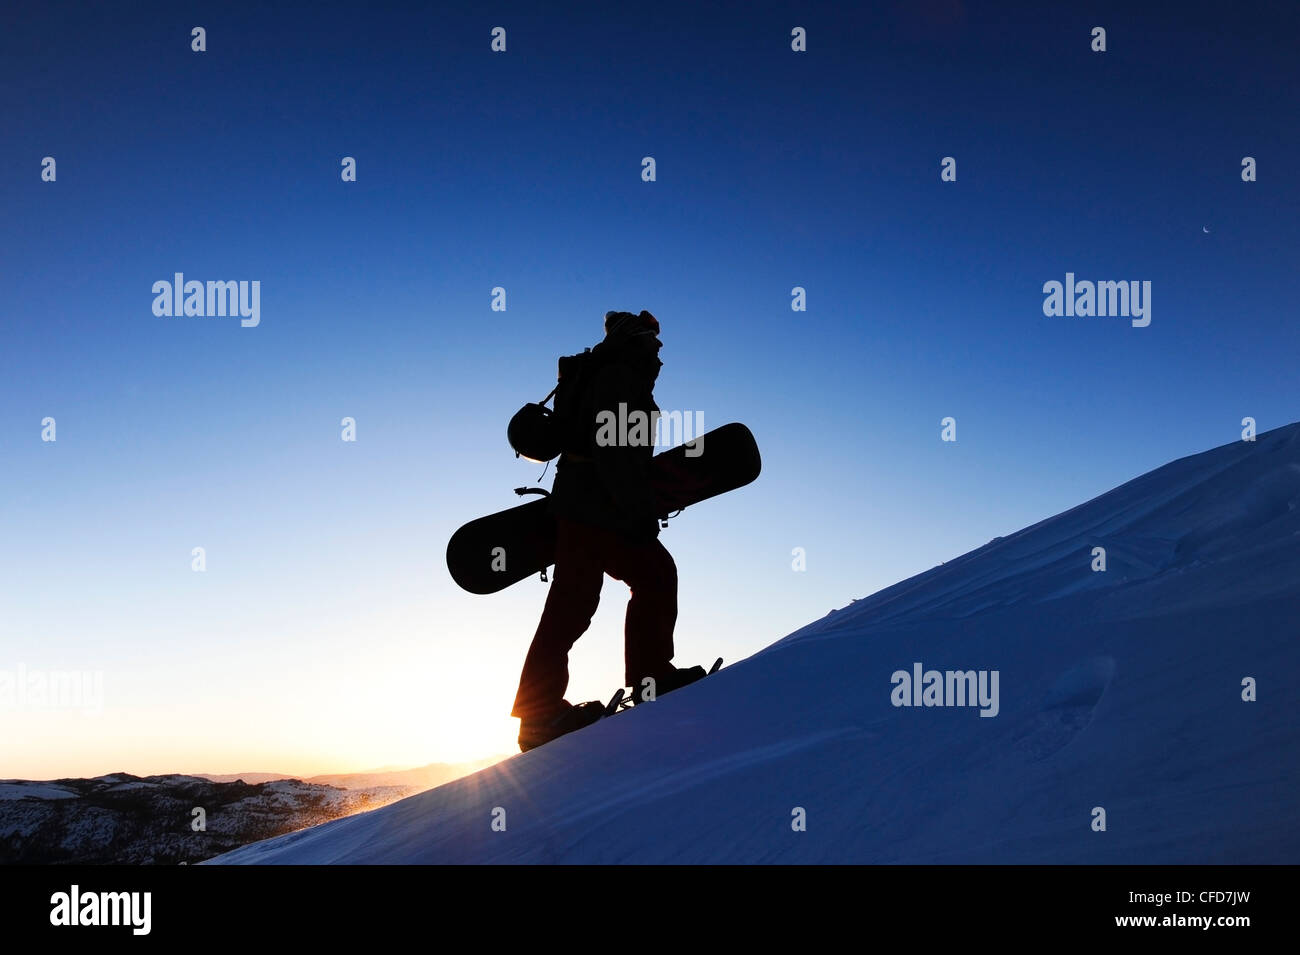 A silhouette of a snowboarder snowshoeing at sunrise in the Sierra Nevada near Lake Tahoe, California. Stock Photo